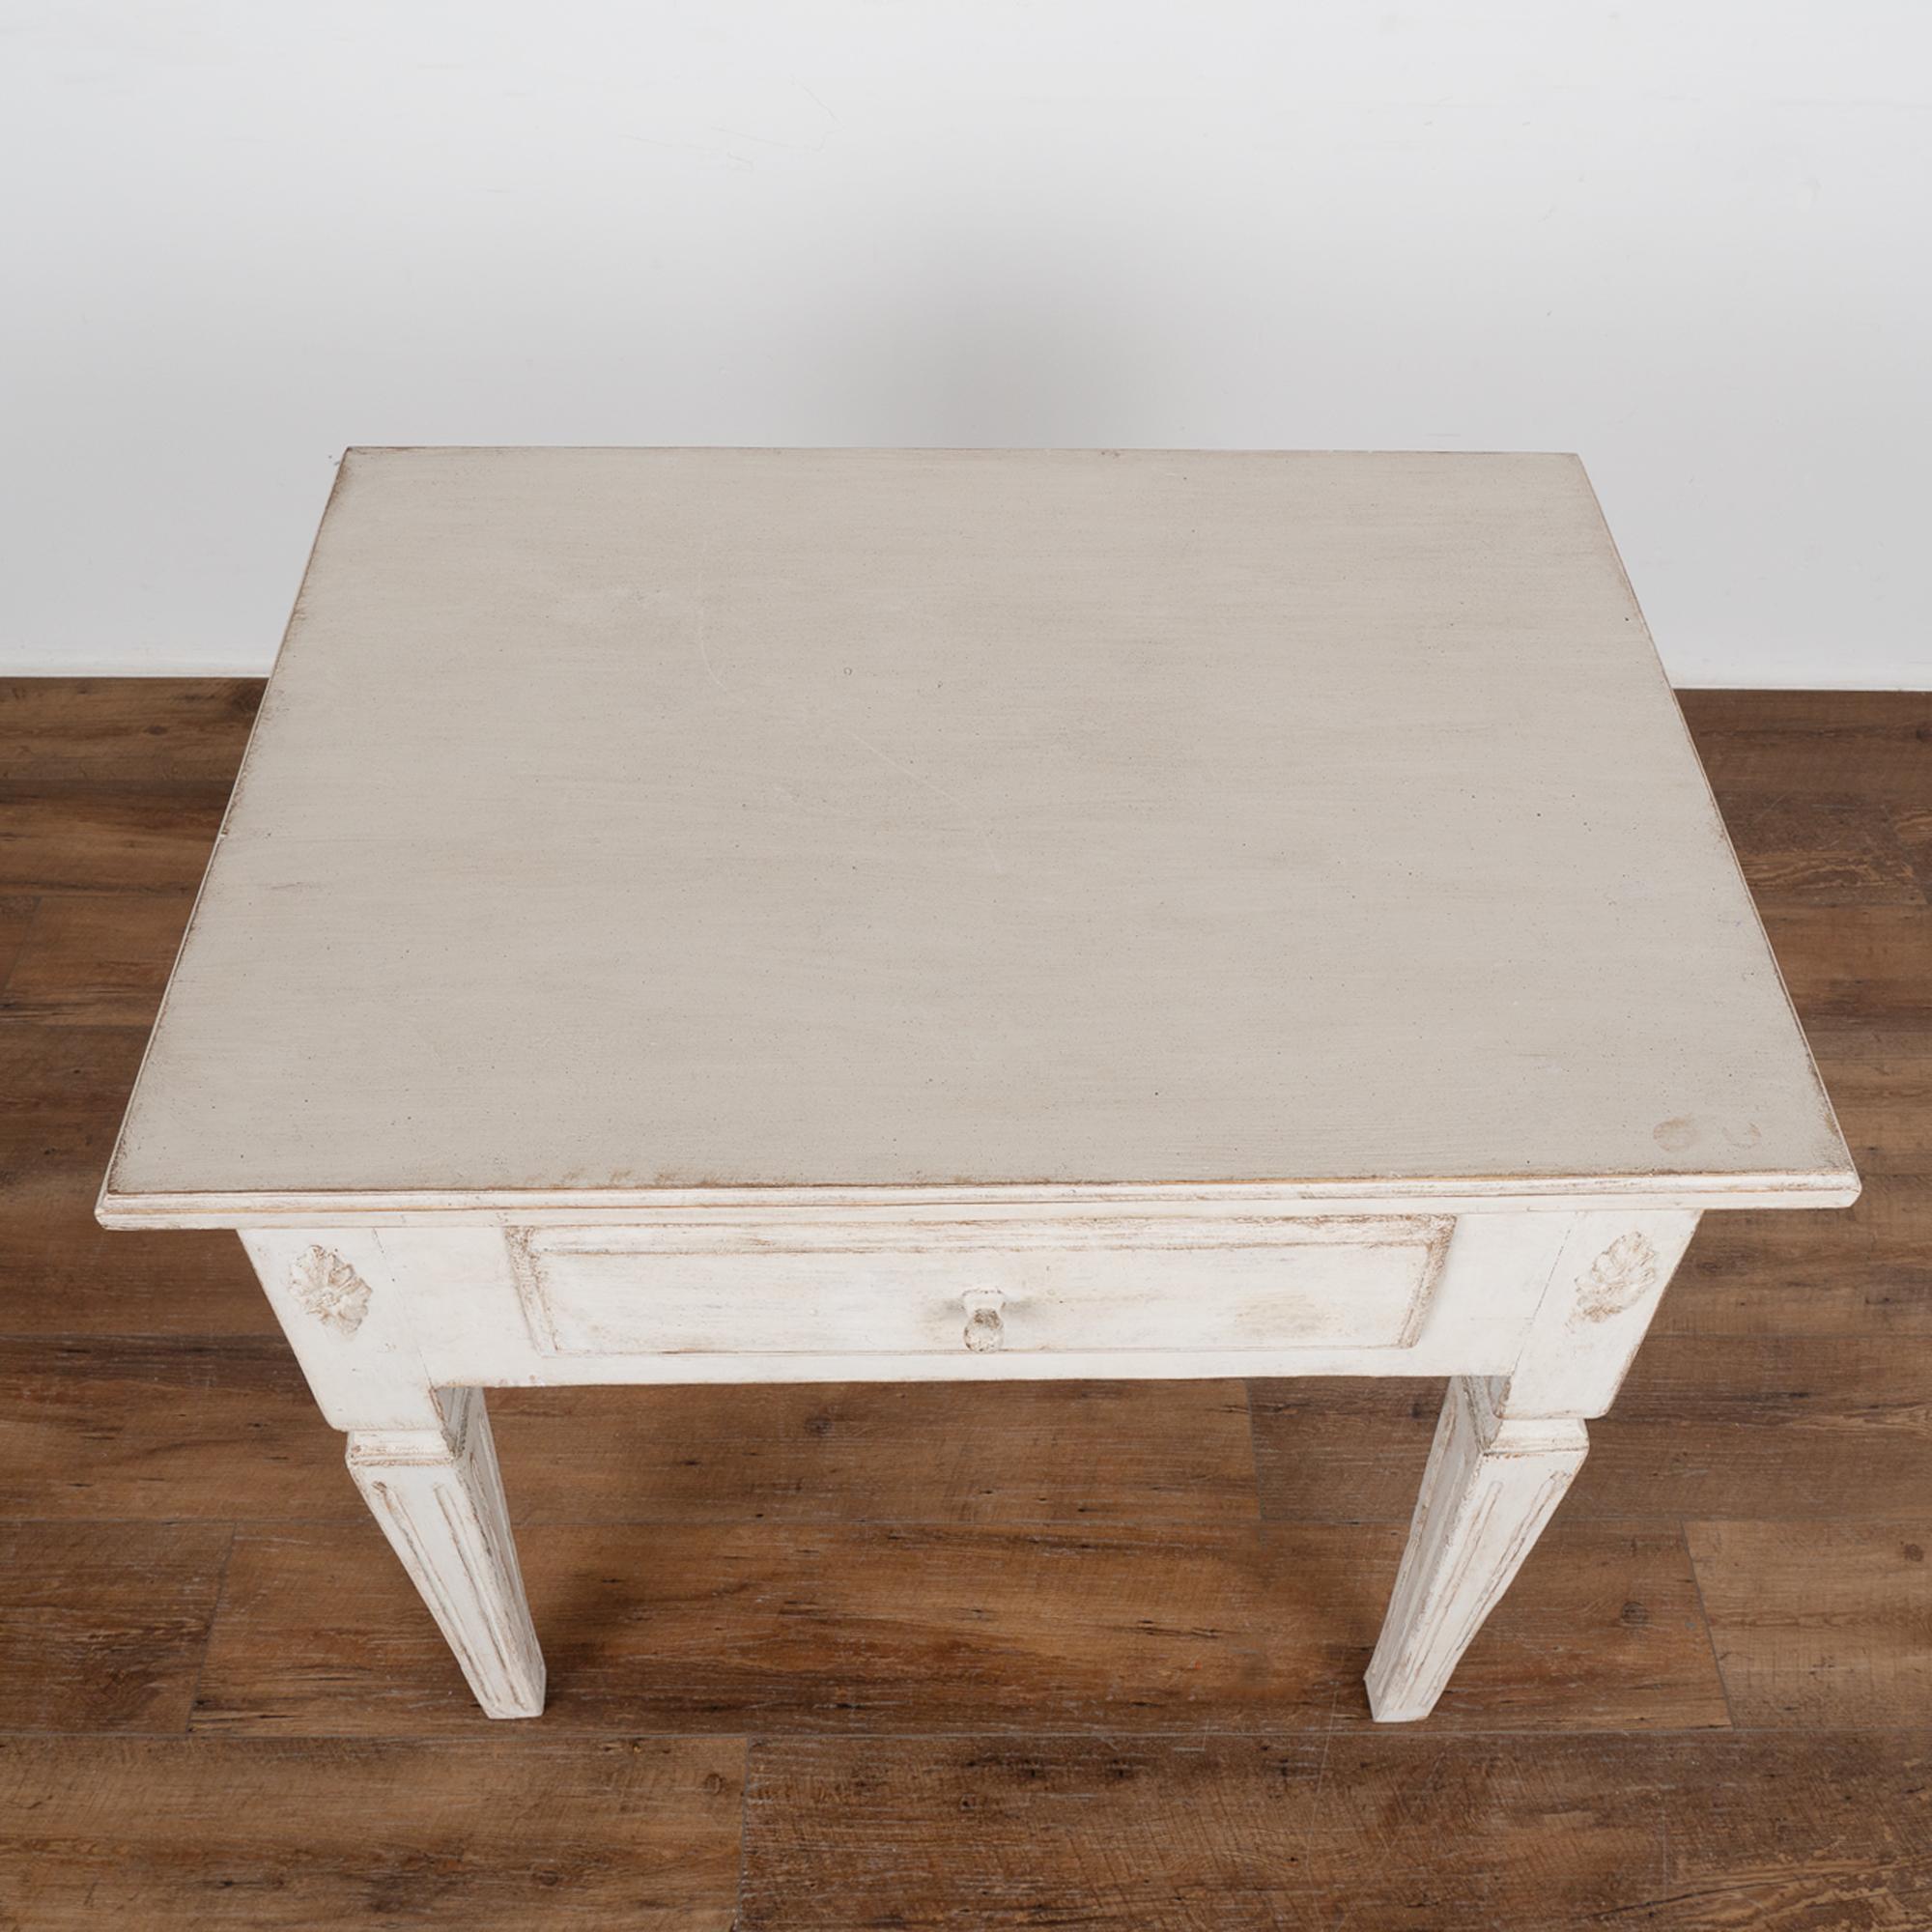 Antique Swedish Gustavian White Painted Side Table With Drawer, circa 1840-60 In Good Condition For Sale In Round Top, TX